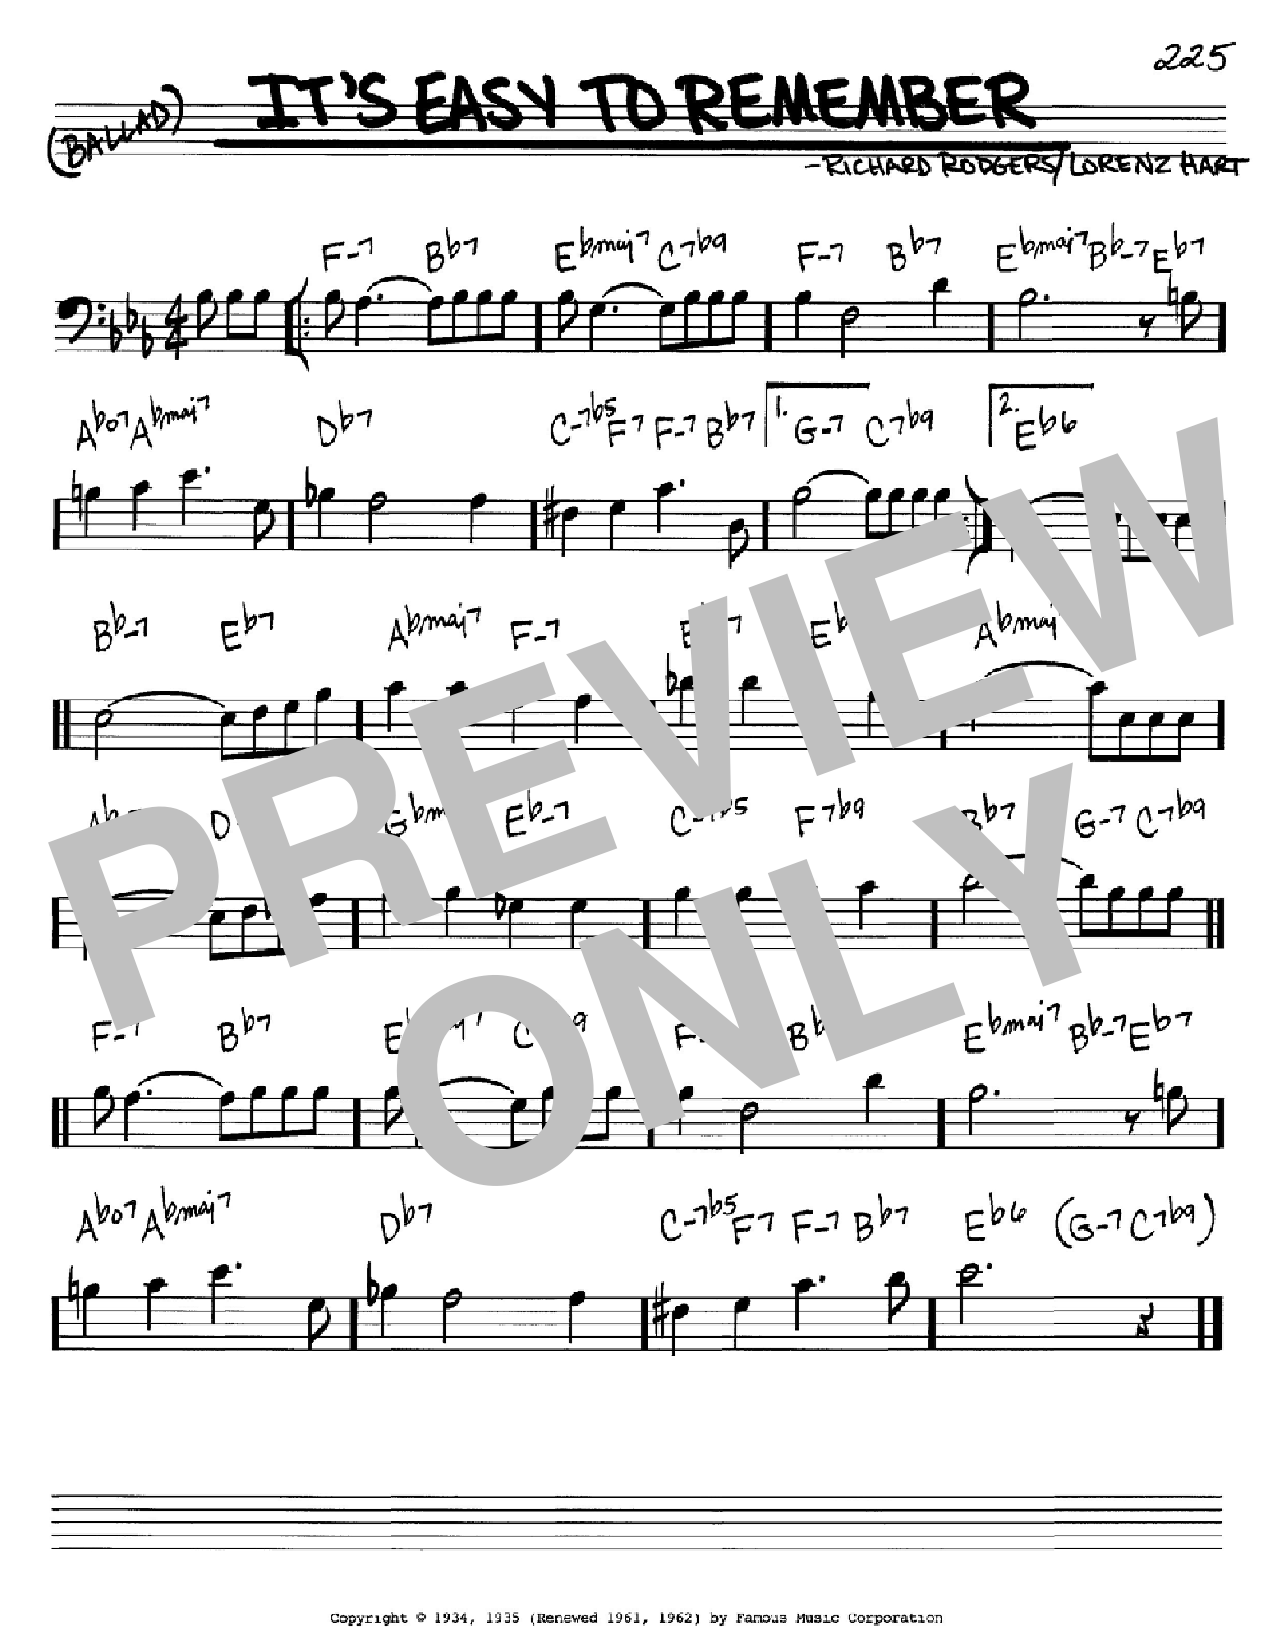 Download Rodgers & Hart It's Easy To Remember Sheet Music